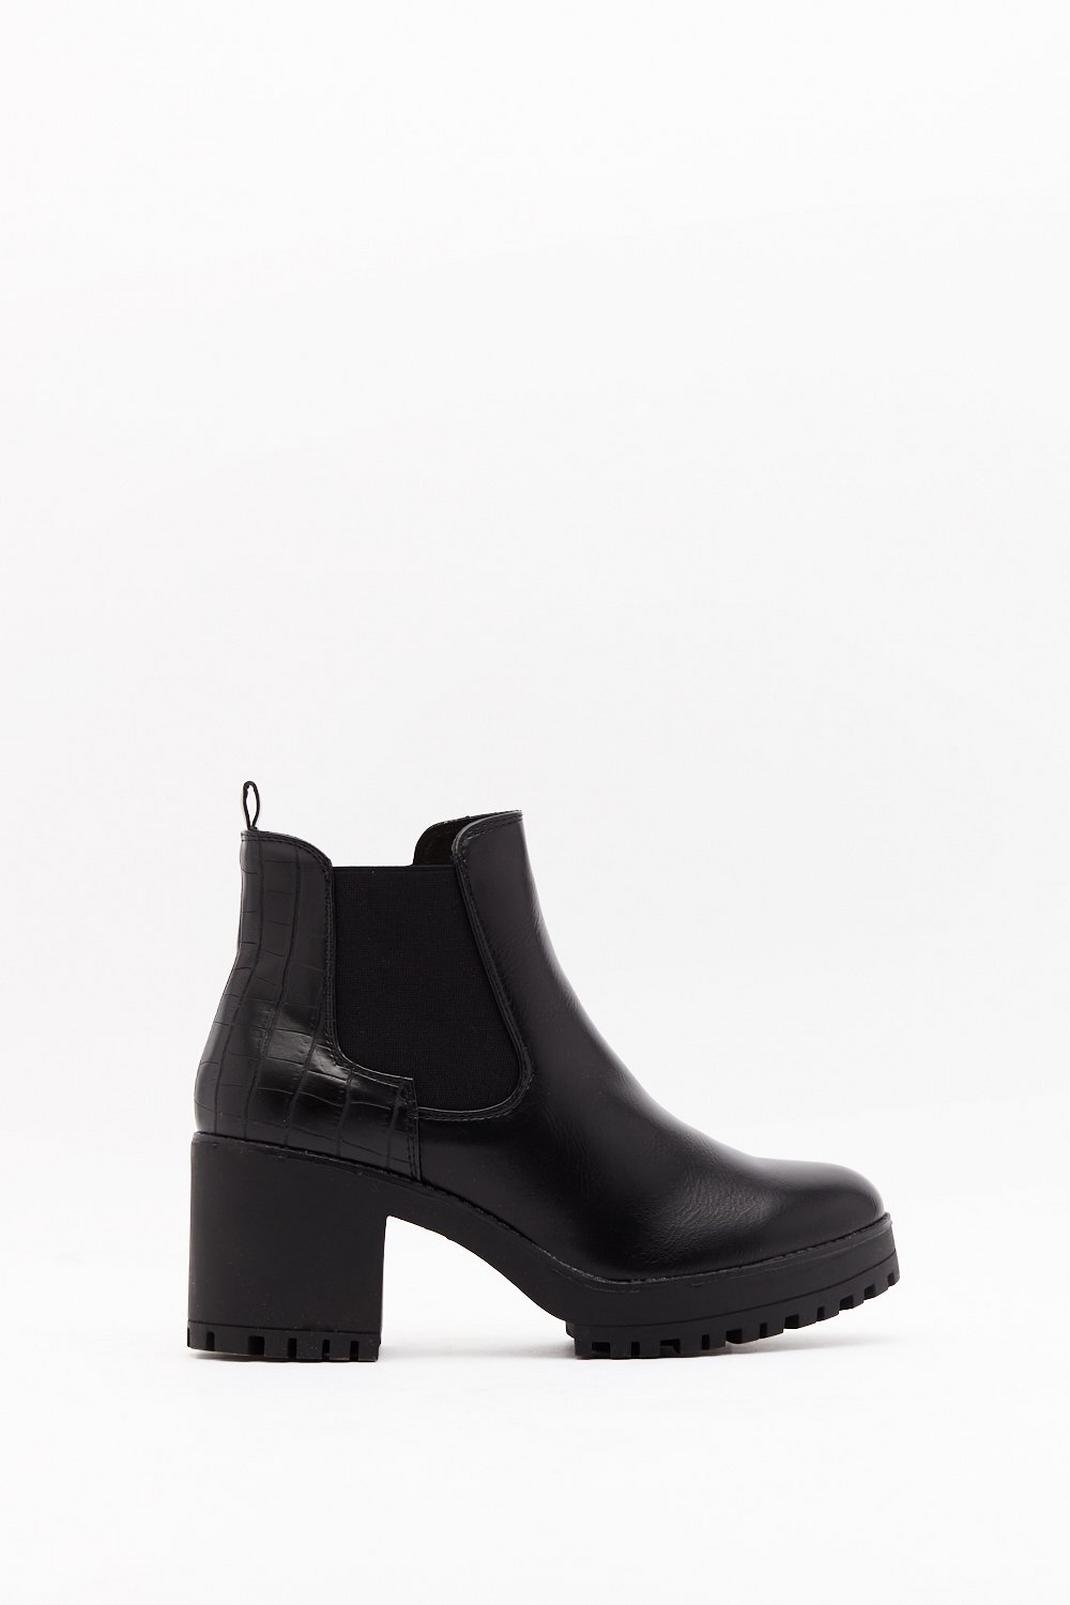 Black Croc Faux Leather Heeled Chelsea Boots image number 1